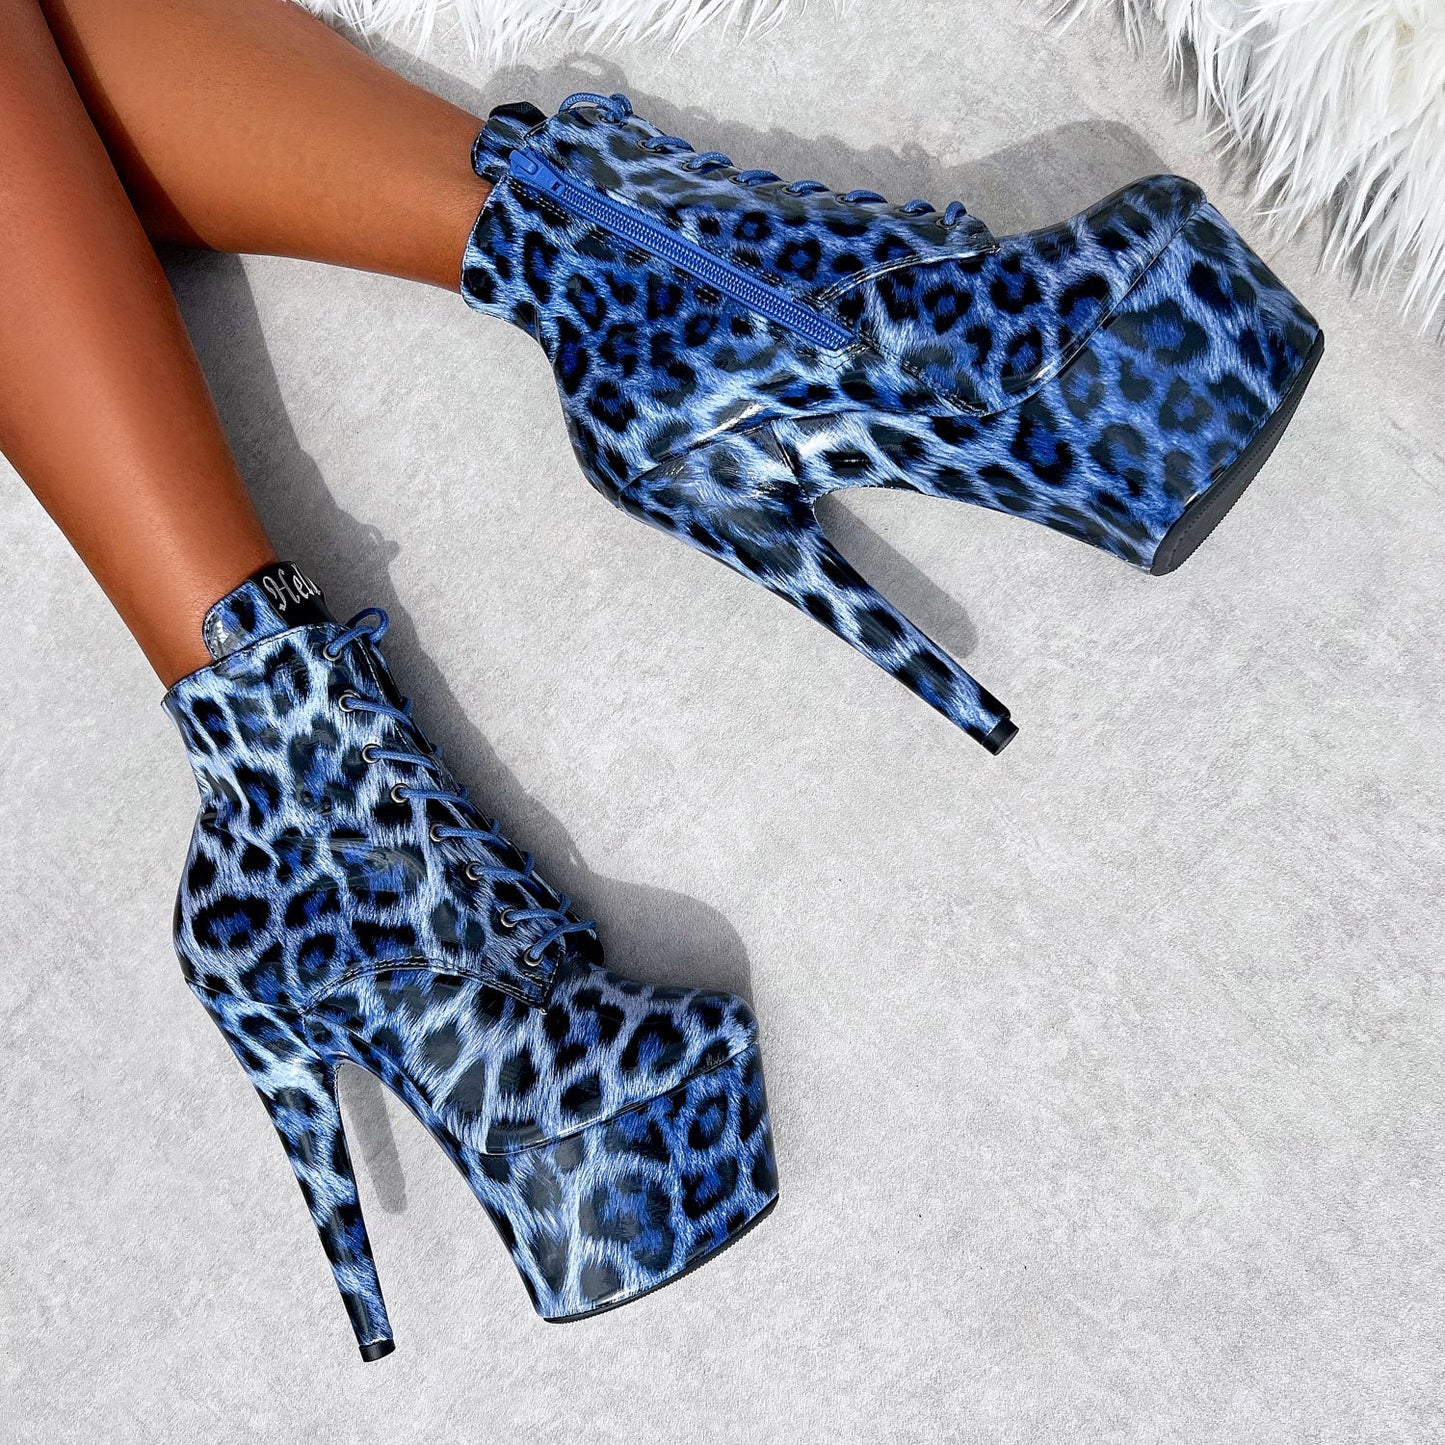 Blue Leopard Ankle Boot - 7 INCH